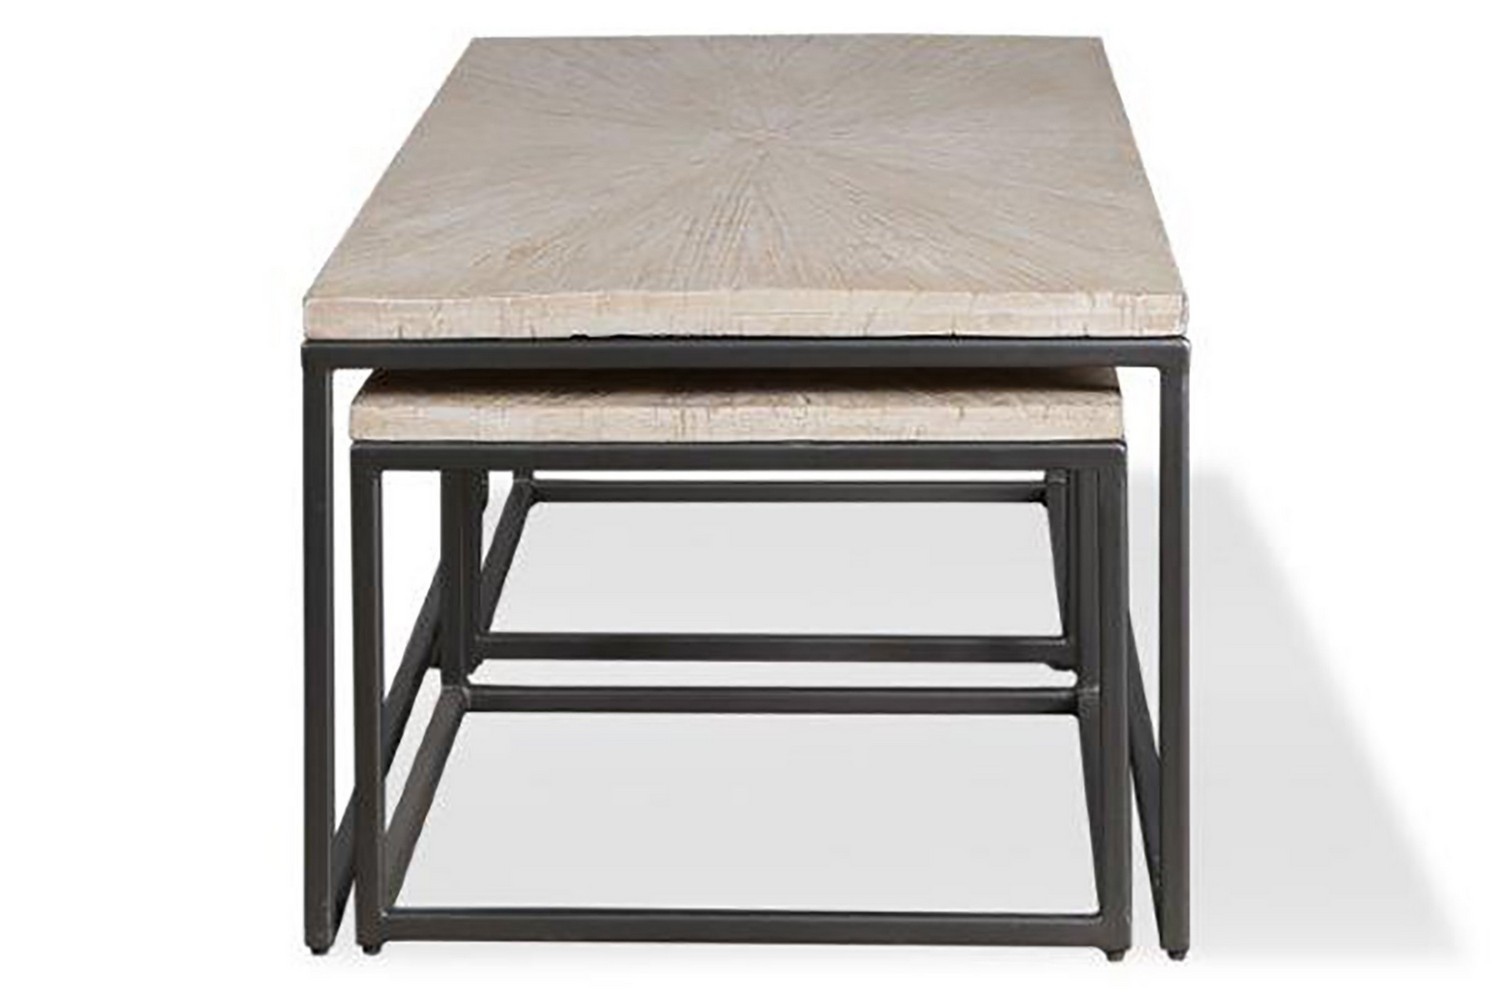 Parker House Crossings Monaco Rectangular Nesting Cocktail Table - Weathered Blanc